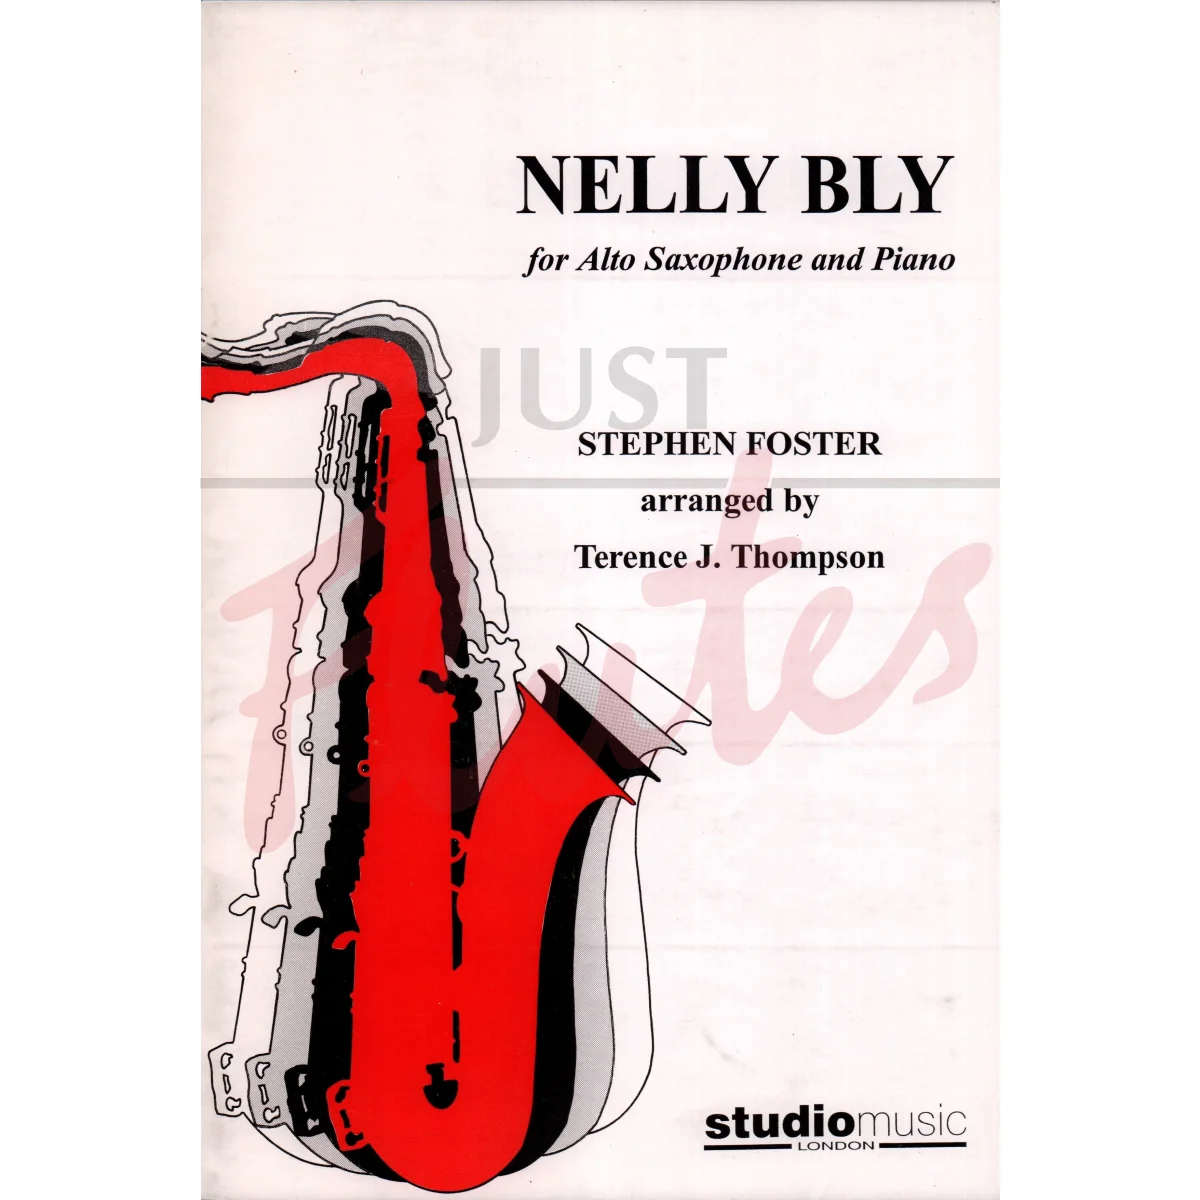 Nelly Bly for Alto Saxophone and Piano